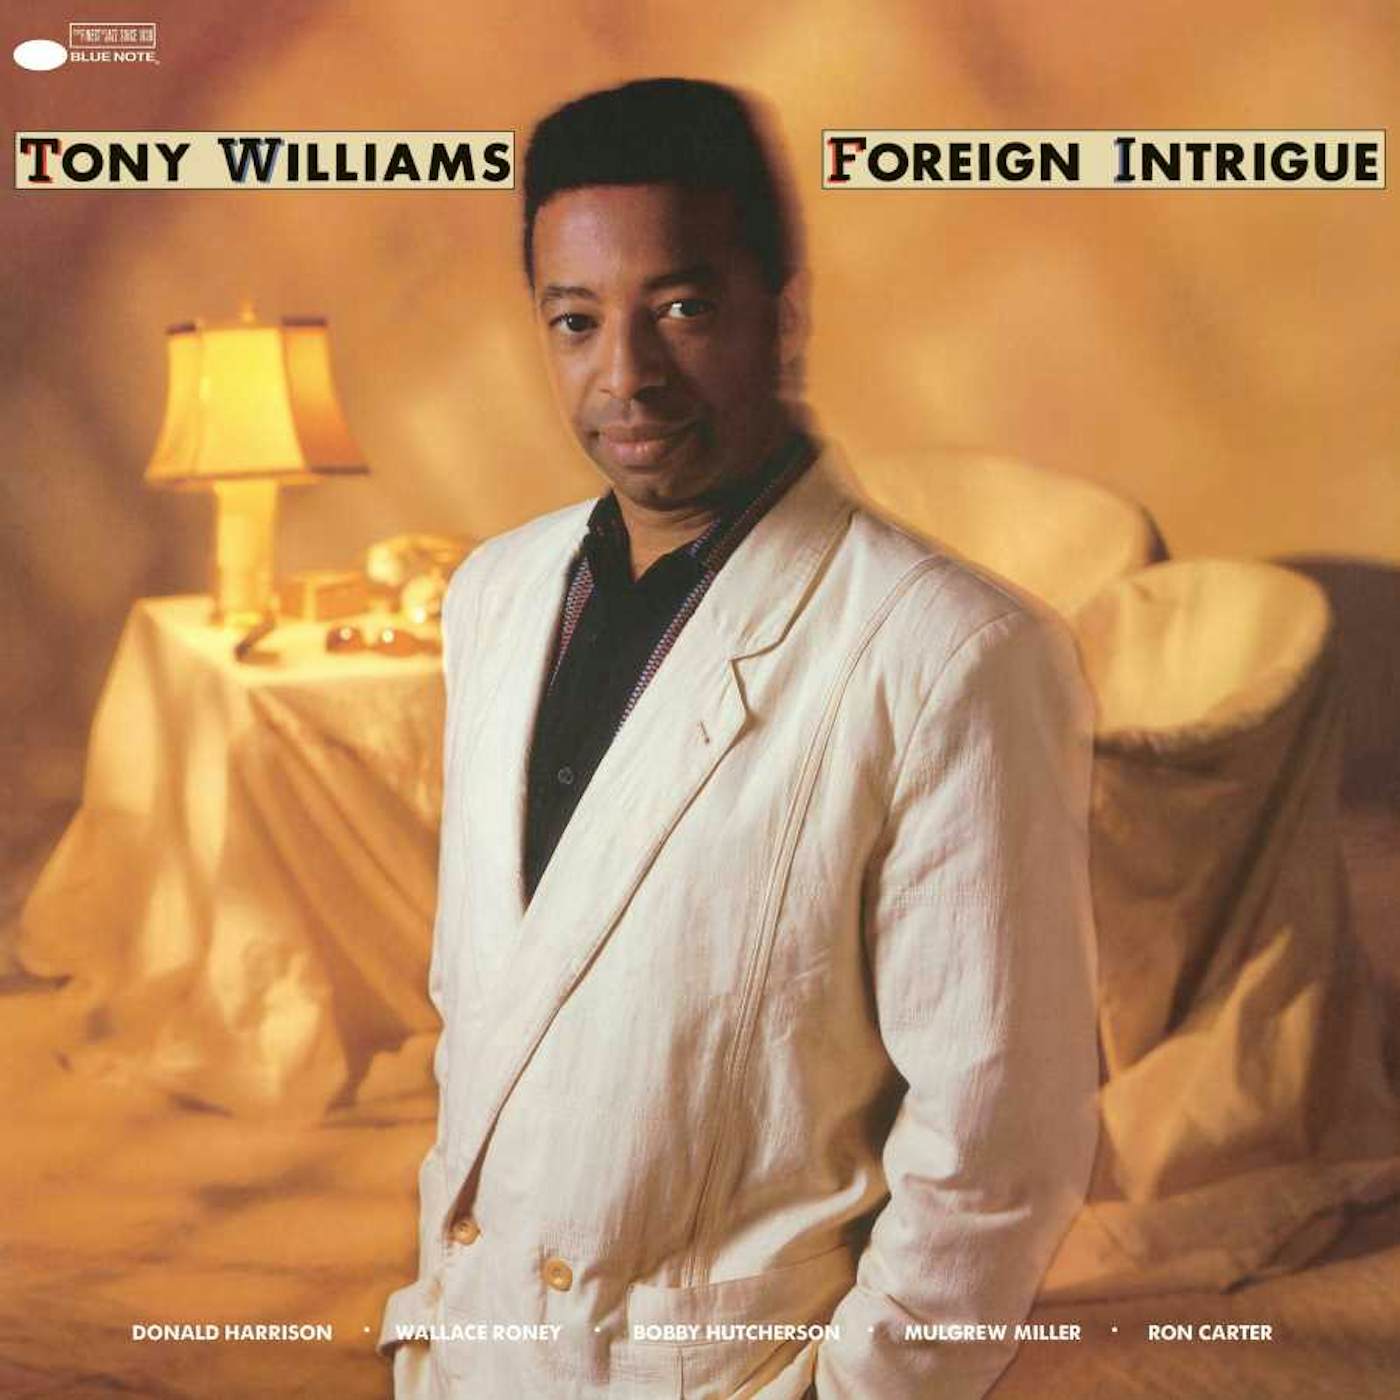 Tony Williams Foreign Intrigue Vinyl Record